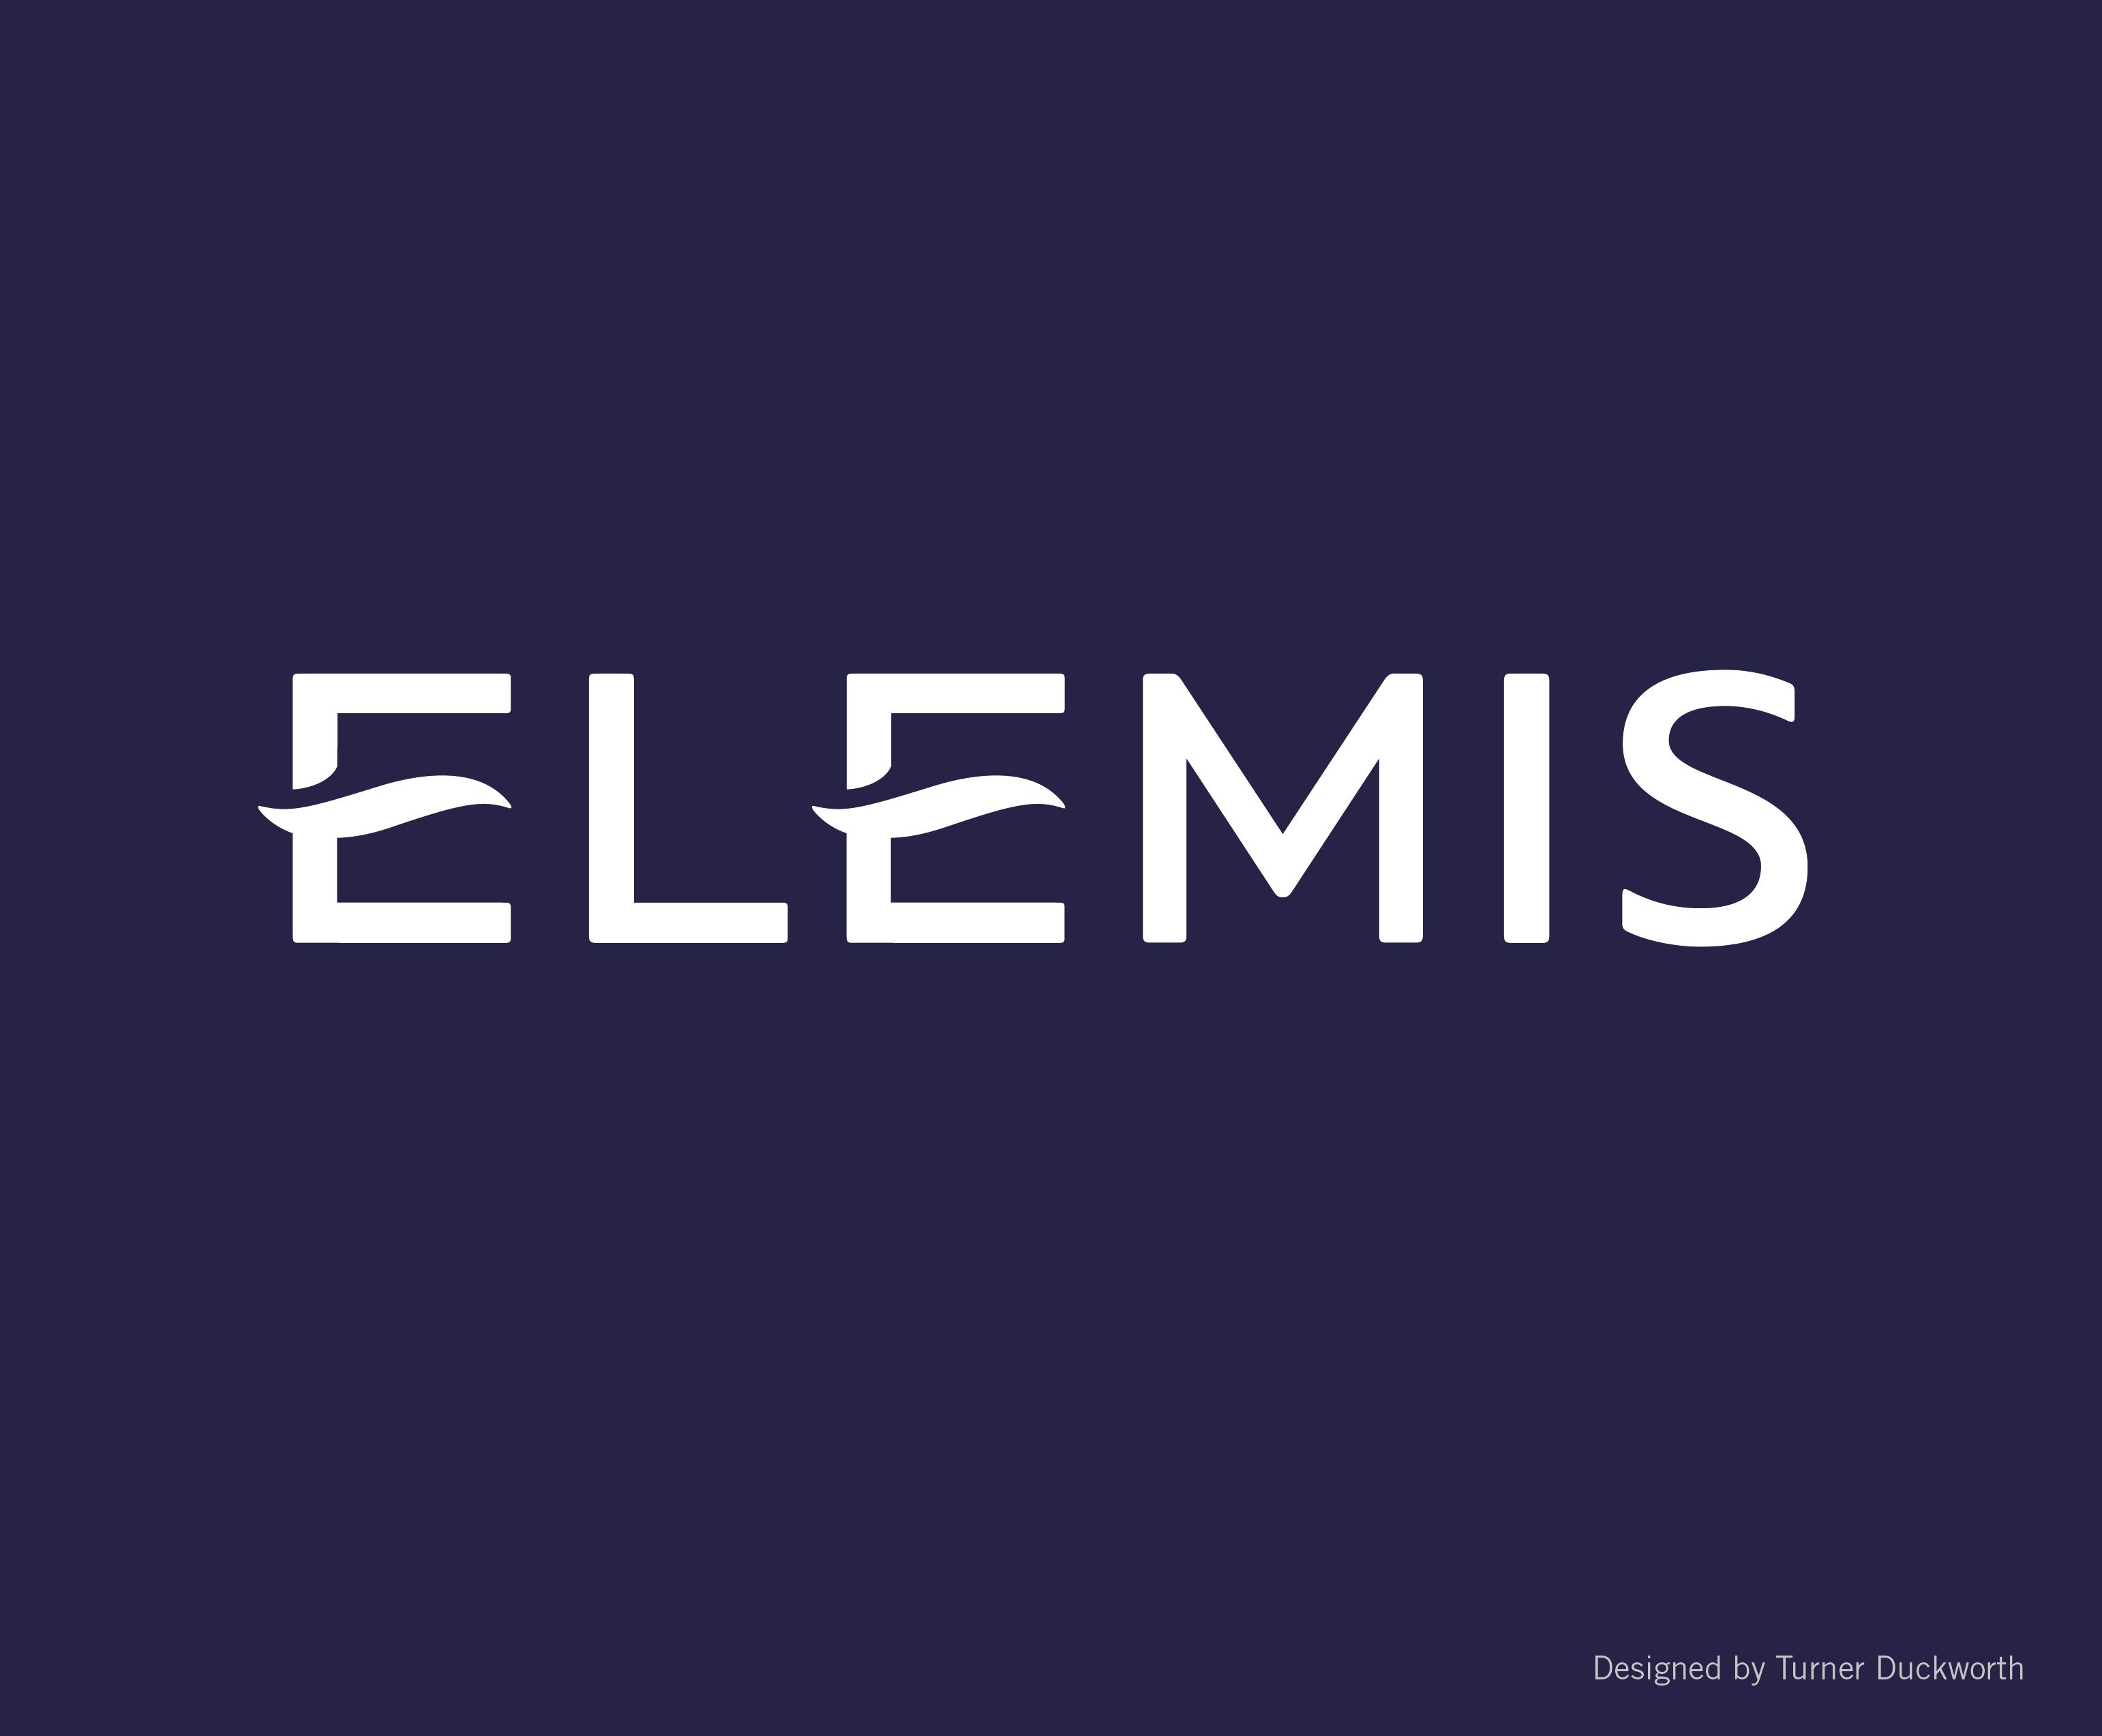 elemis coupon codes, promo codes and deals